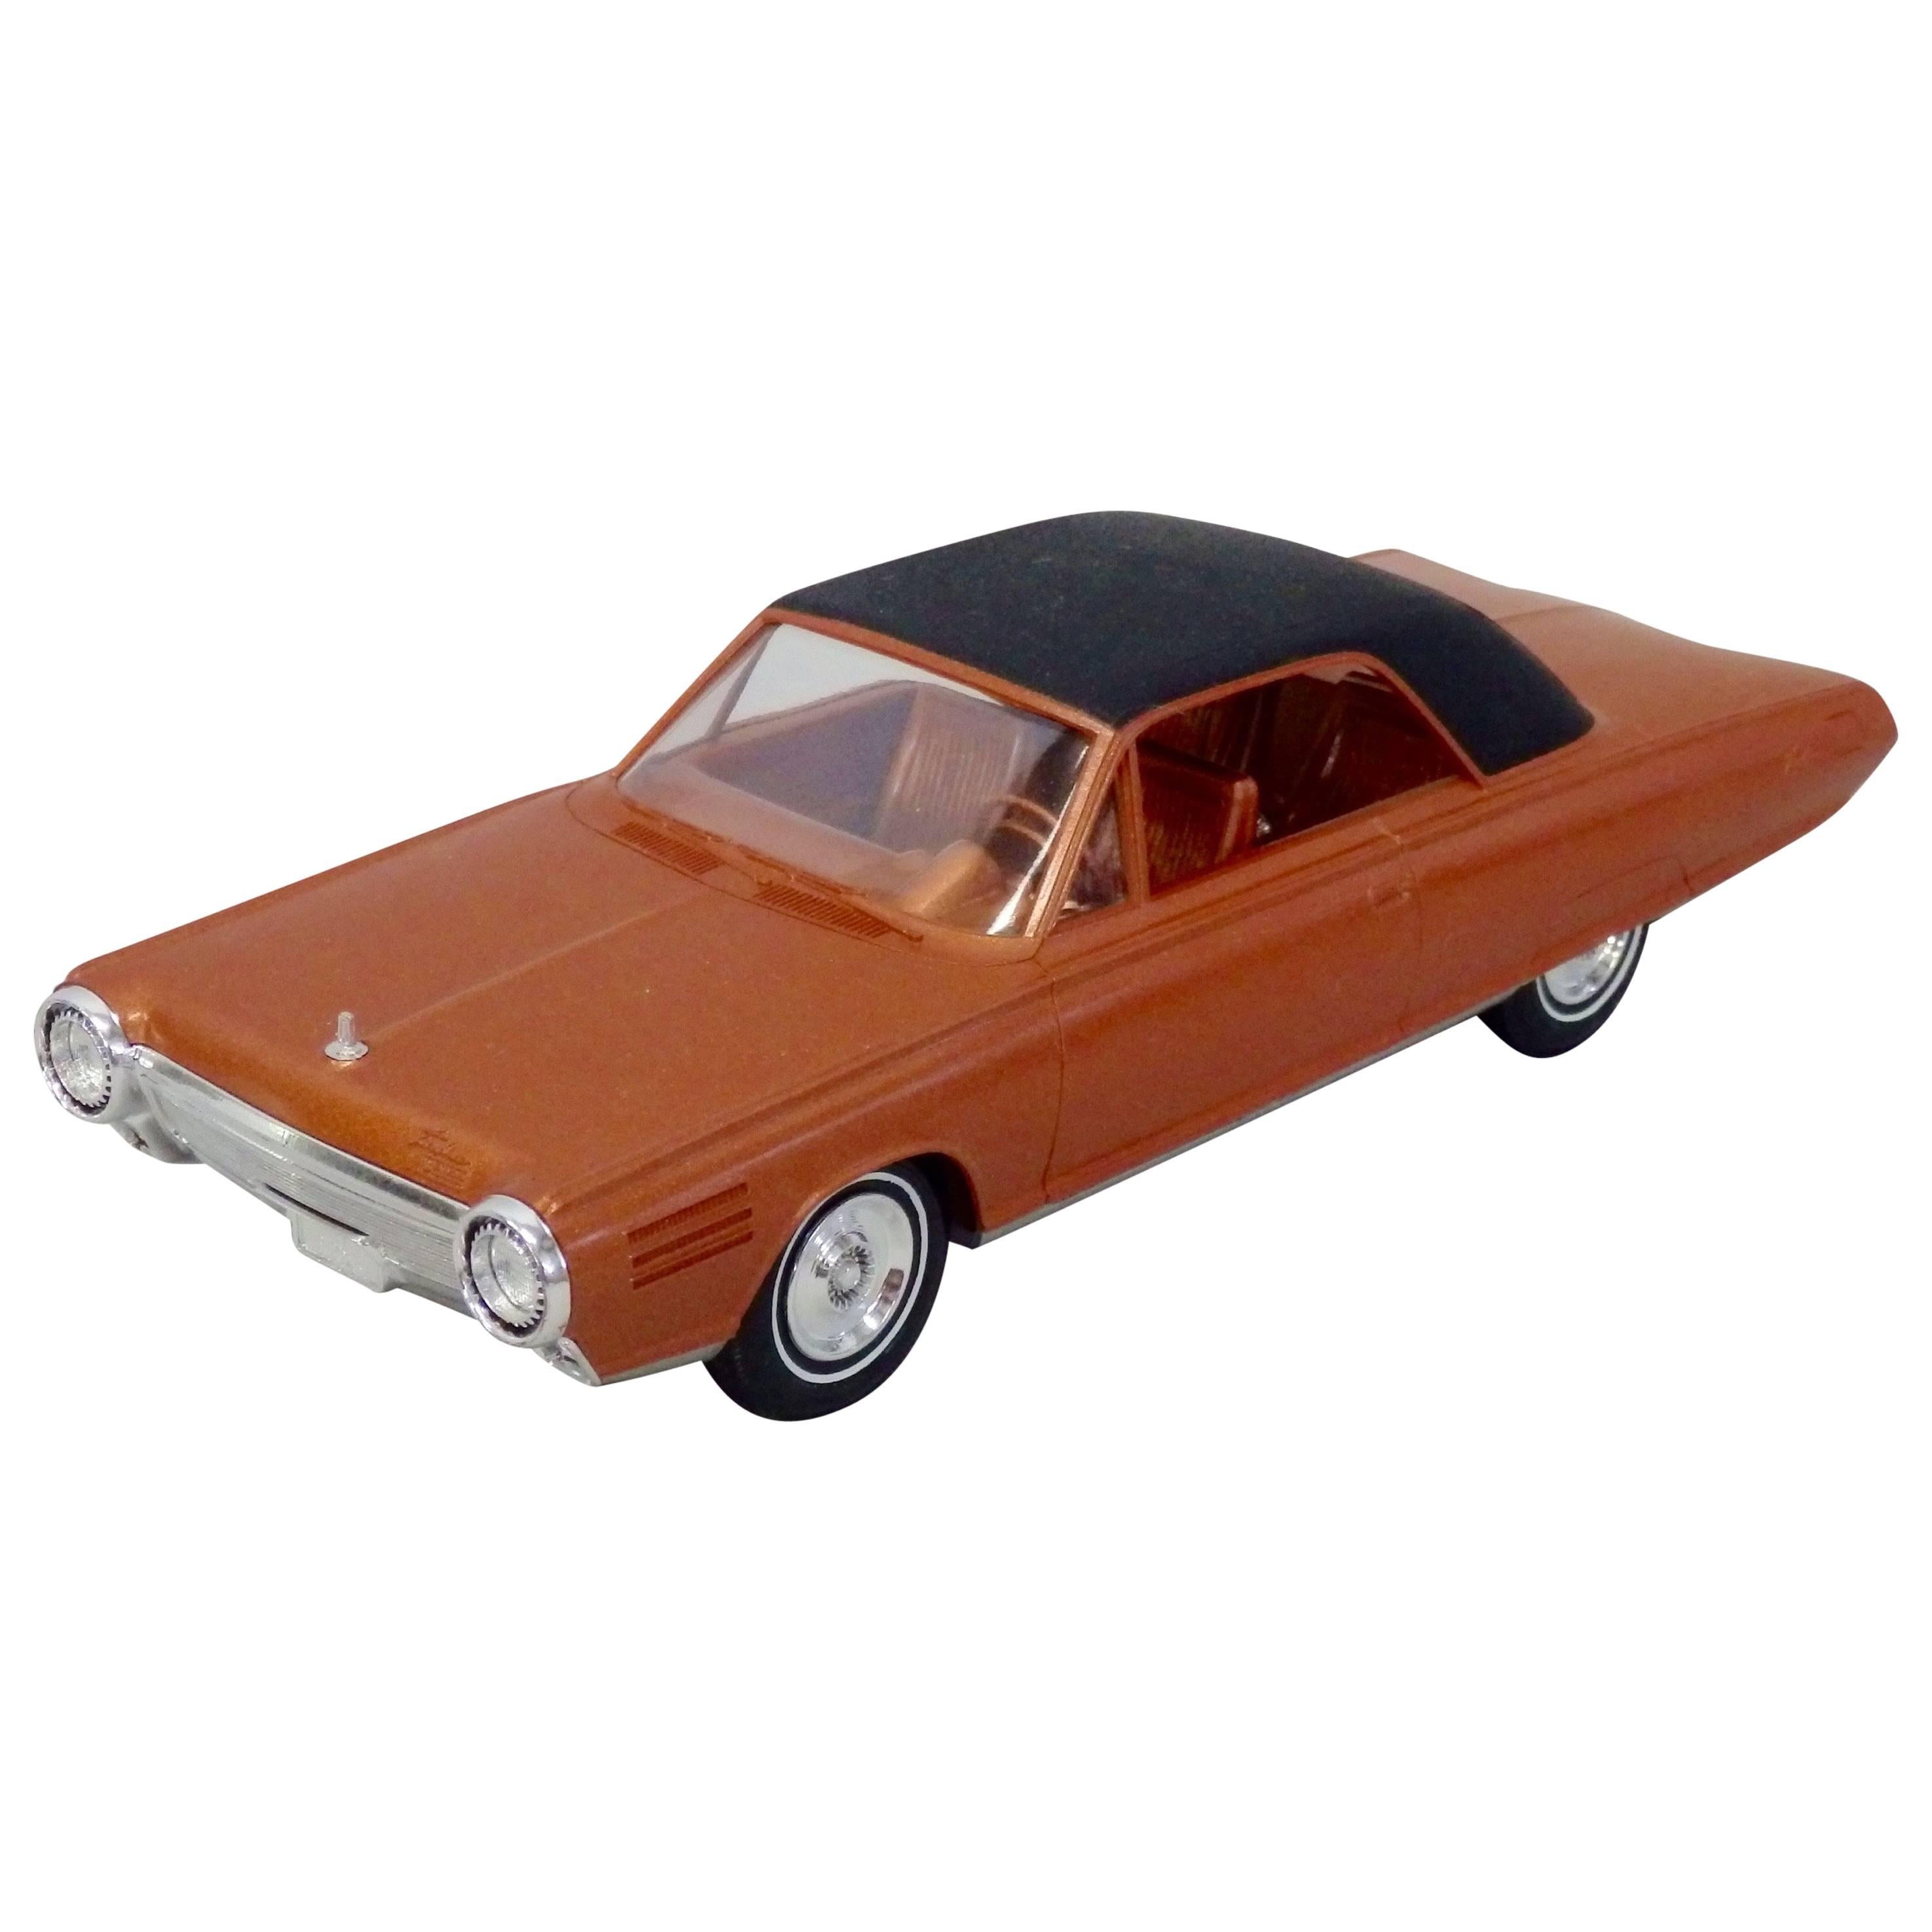 1963 Chrysler Concept Turbine Car Promotional Model with Box